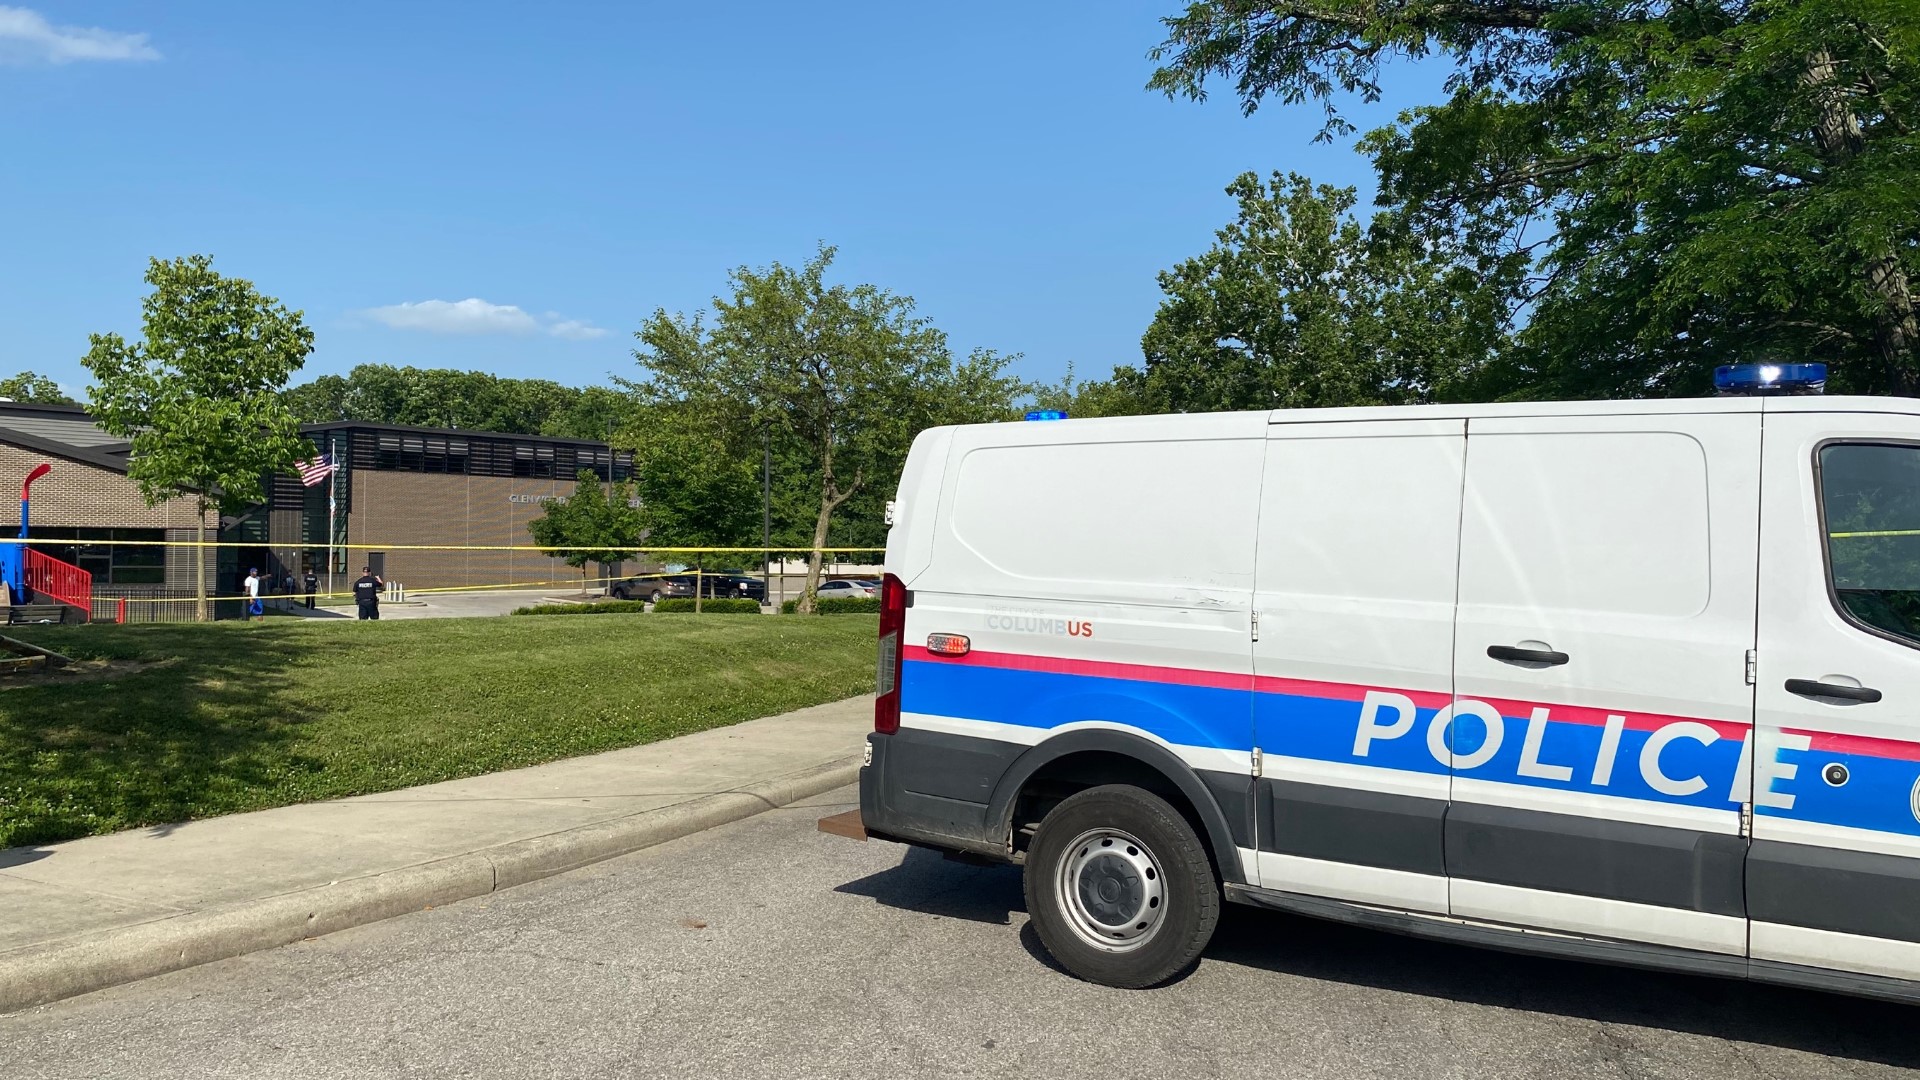 A fight between two girls led to a deadly shooting outside of the Glenwood Community Center last week, according to the Columbus Division of Police.